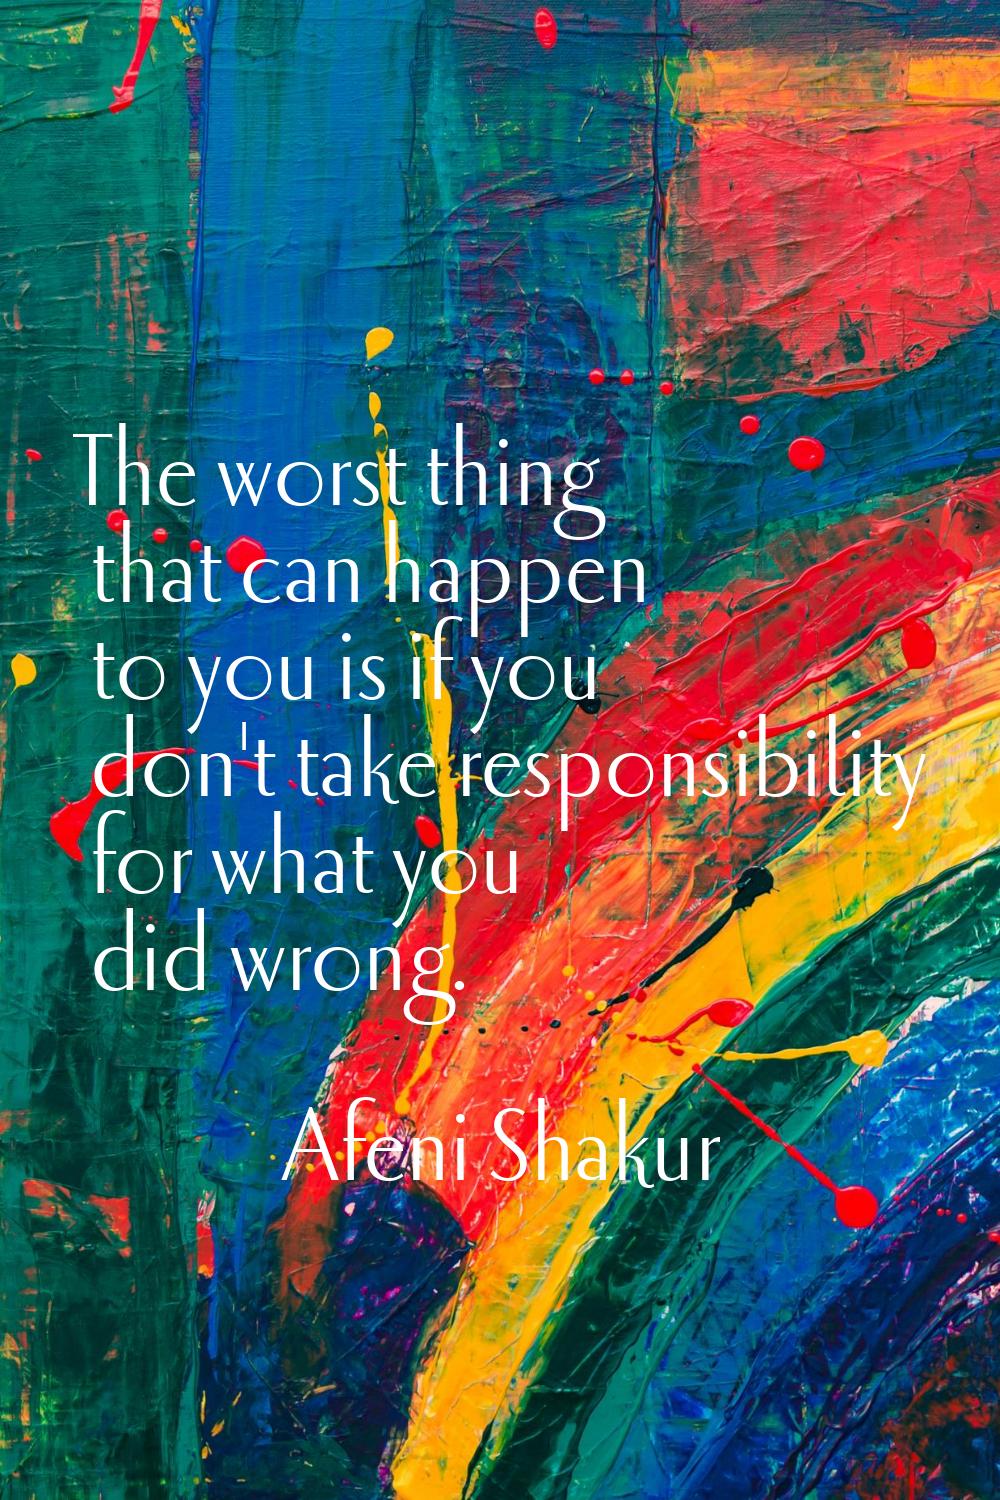 The worst thing that can happen to you is if you don't take responsibility for what you did wrong.